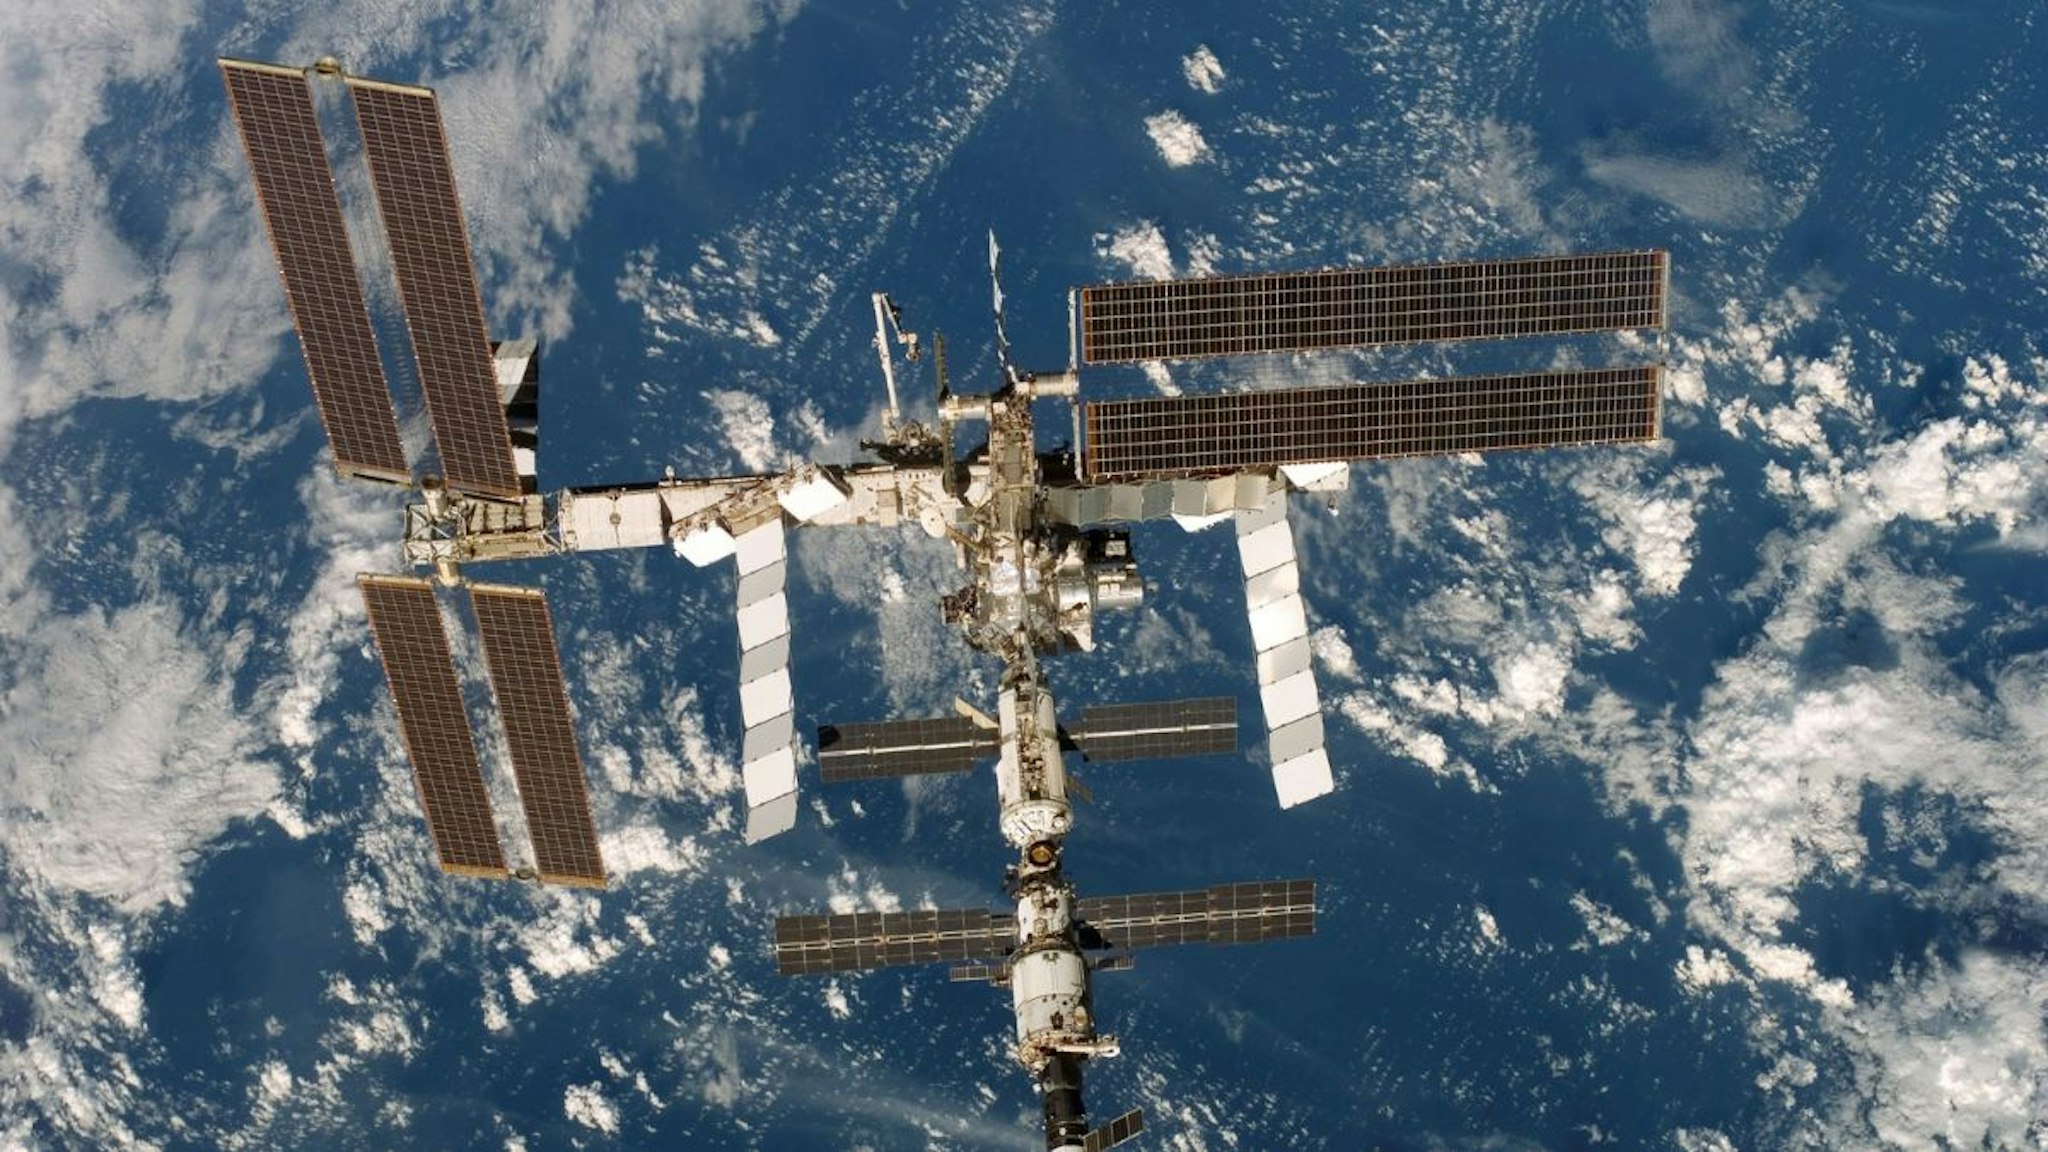 In this handout from NASA, the International Space Station is seen from the Space Shuttle Discovery after undocking from the station December 19, 2006 in orbit around the Earth.